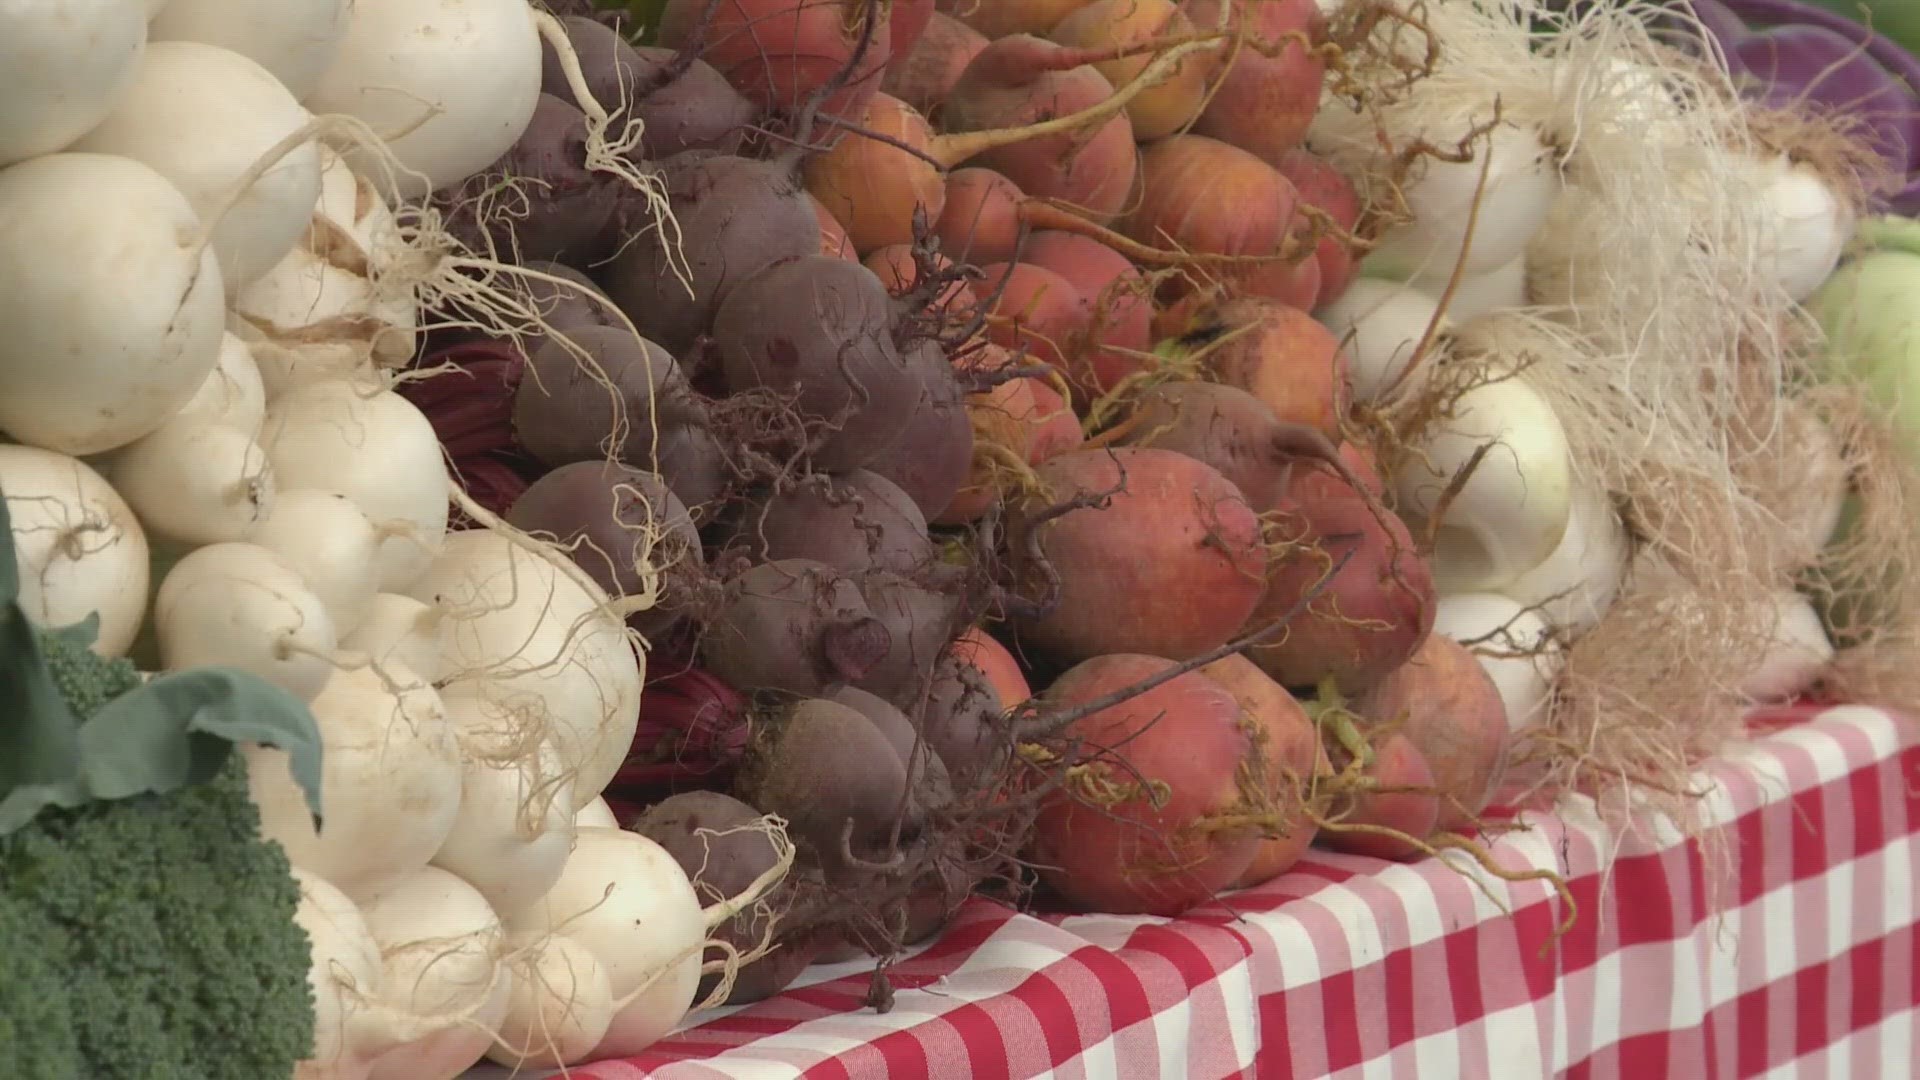 You can find fresh, locally raised produce, eats, eggs and prepared foods.